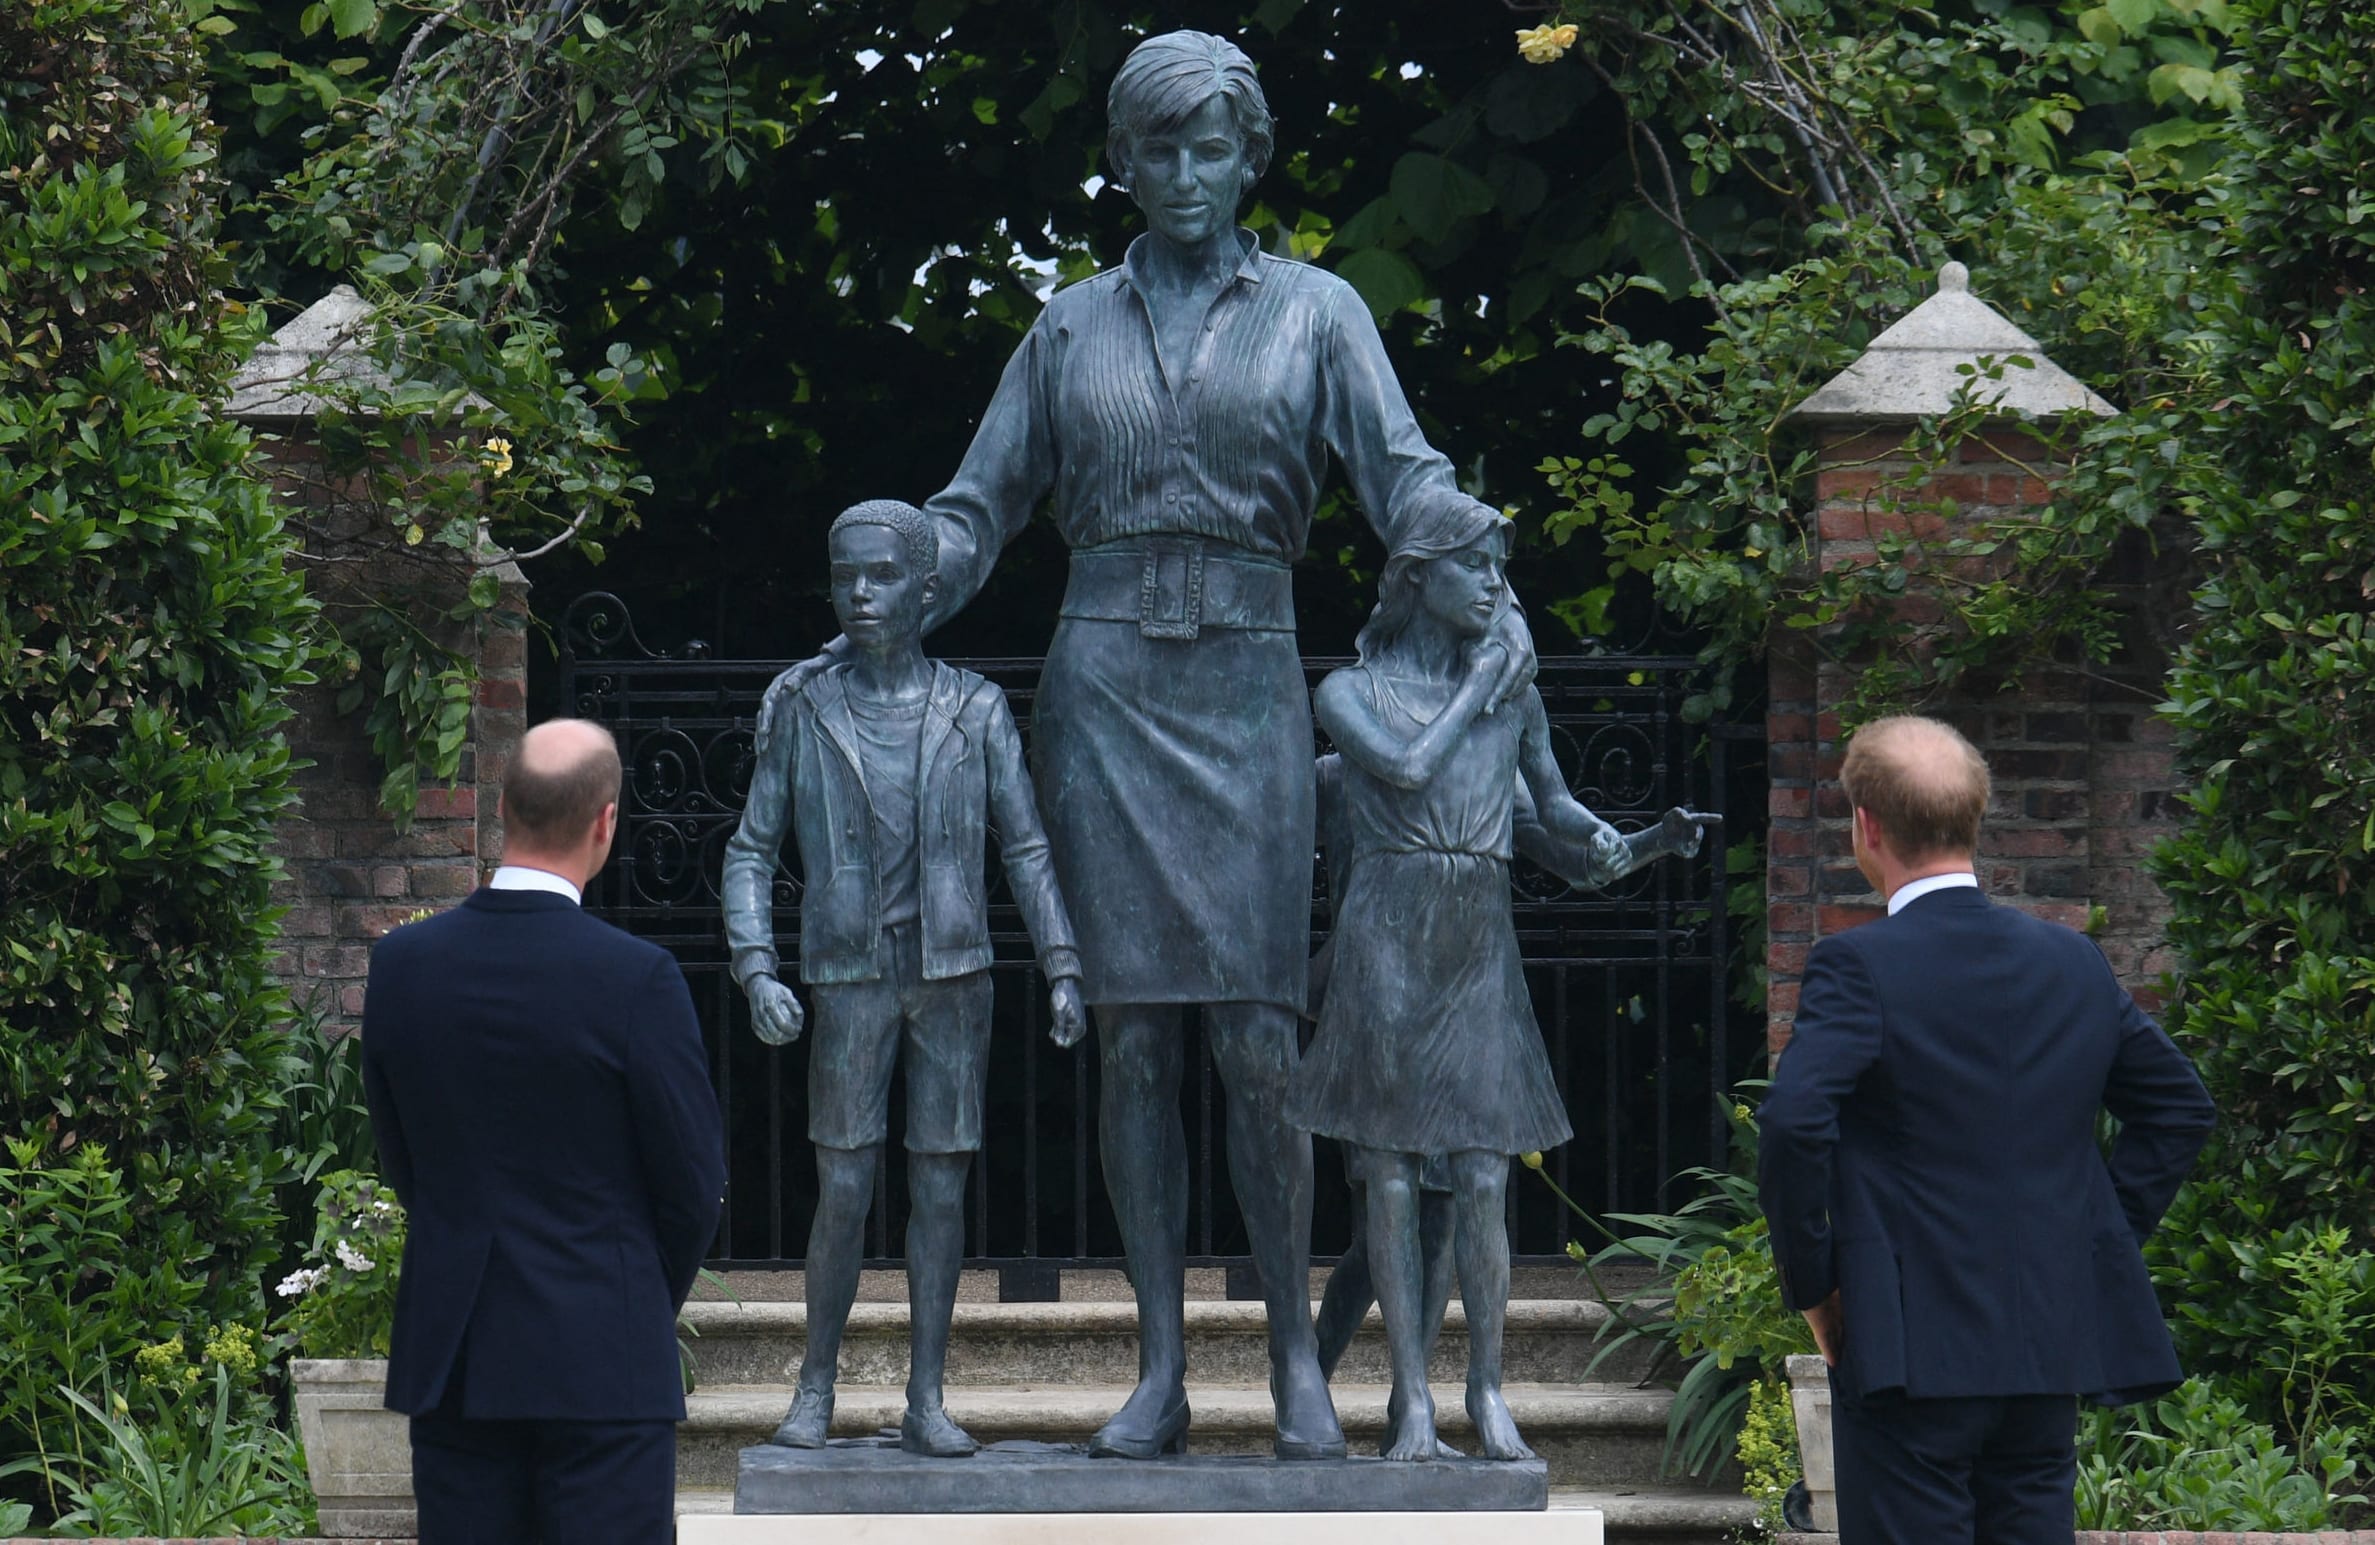 Prince William, Duke of Cambridge, left, and Prince Harry, Duke of Sussex unveil a statue of their late mother, Princess Diana at The Sunken Garden in Kensington Palace, London on 1 July, 2021, which would have been her 60th birthday.